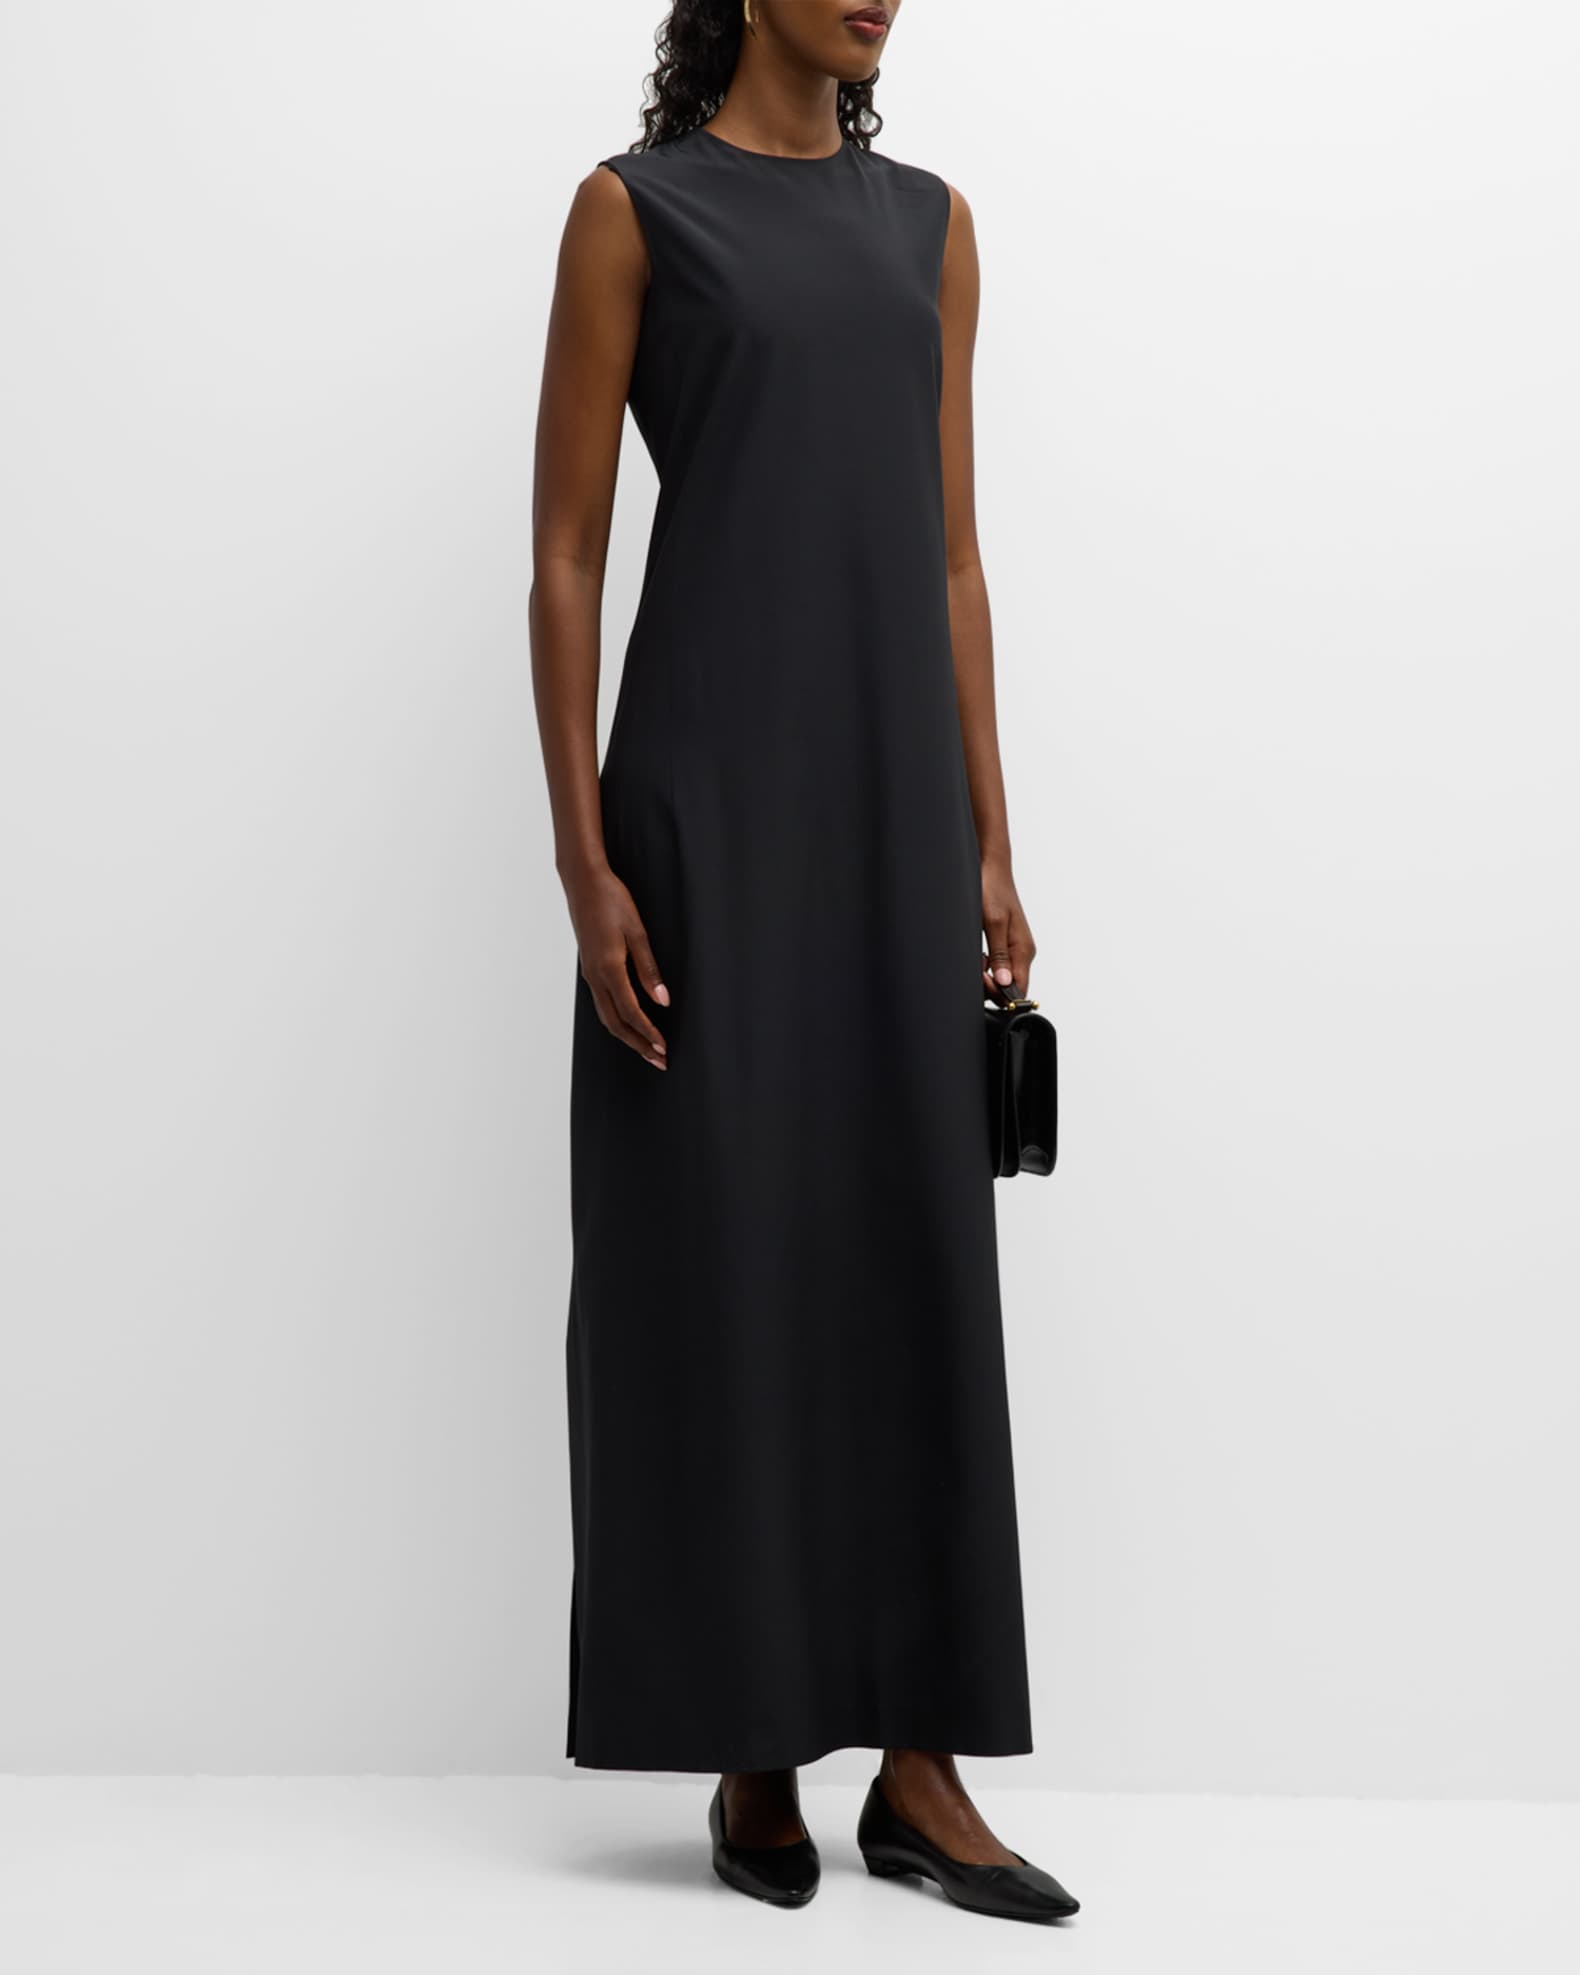 THE ROW Calanthe Wool Gown with Cape Back | Neiman Marcus